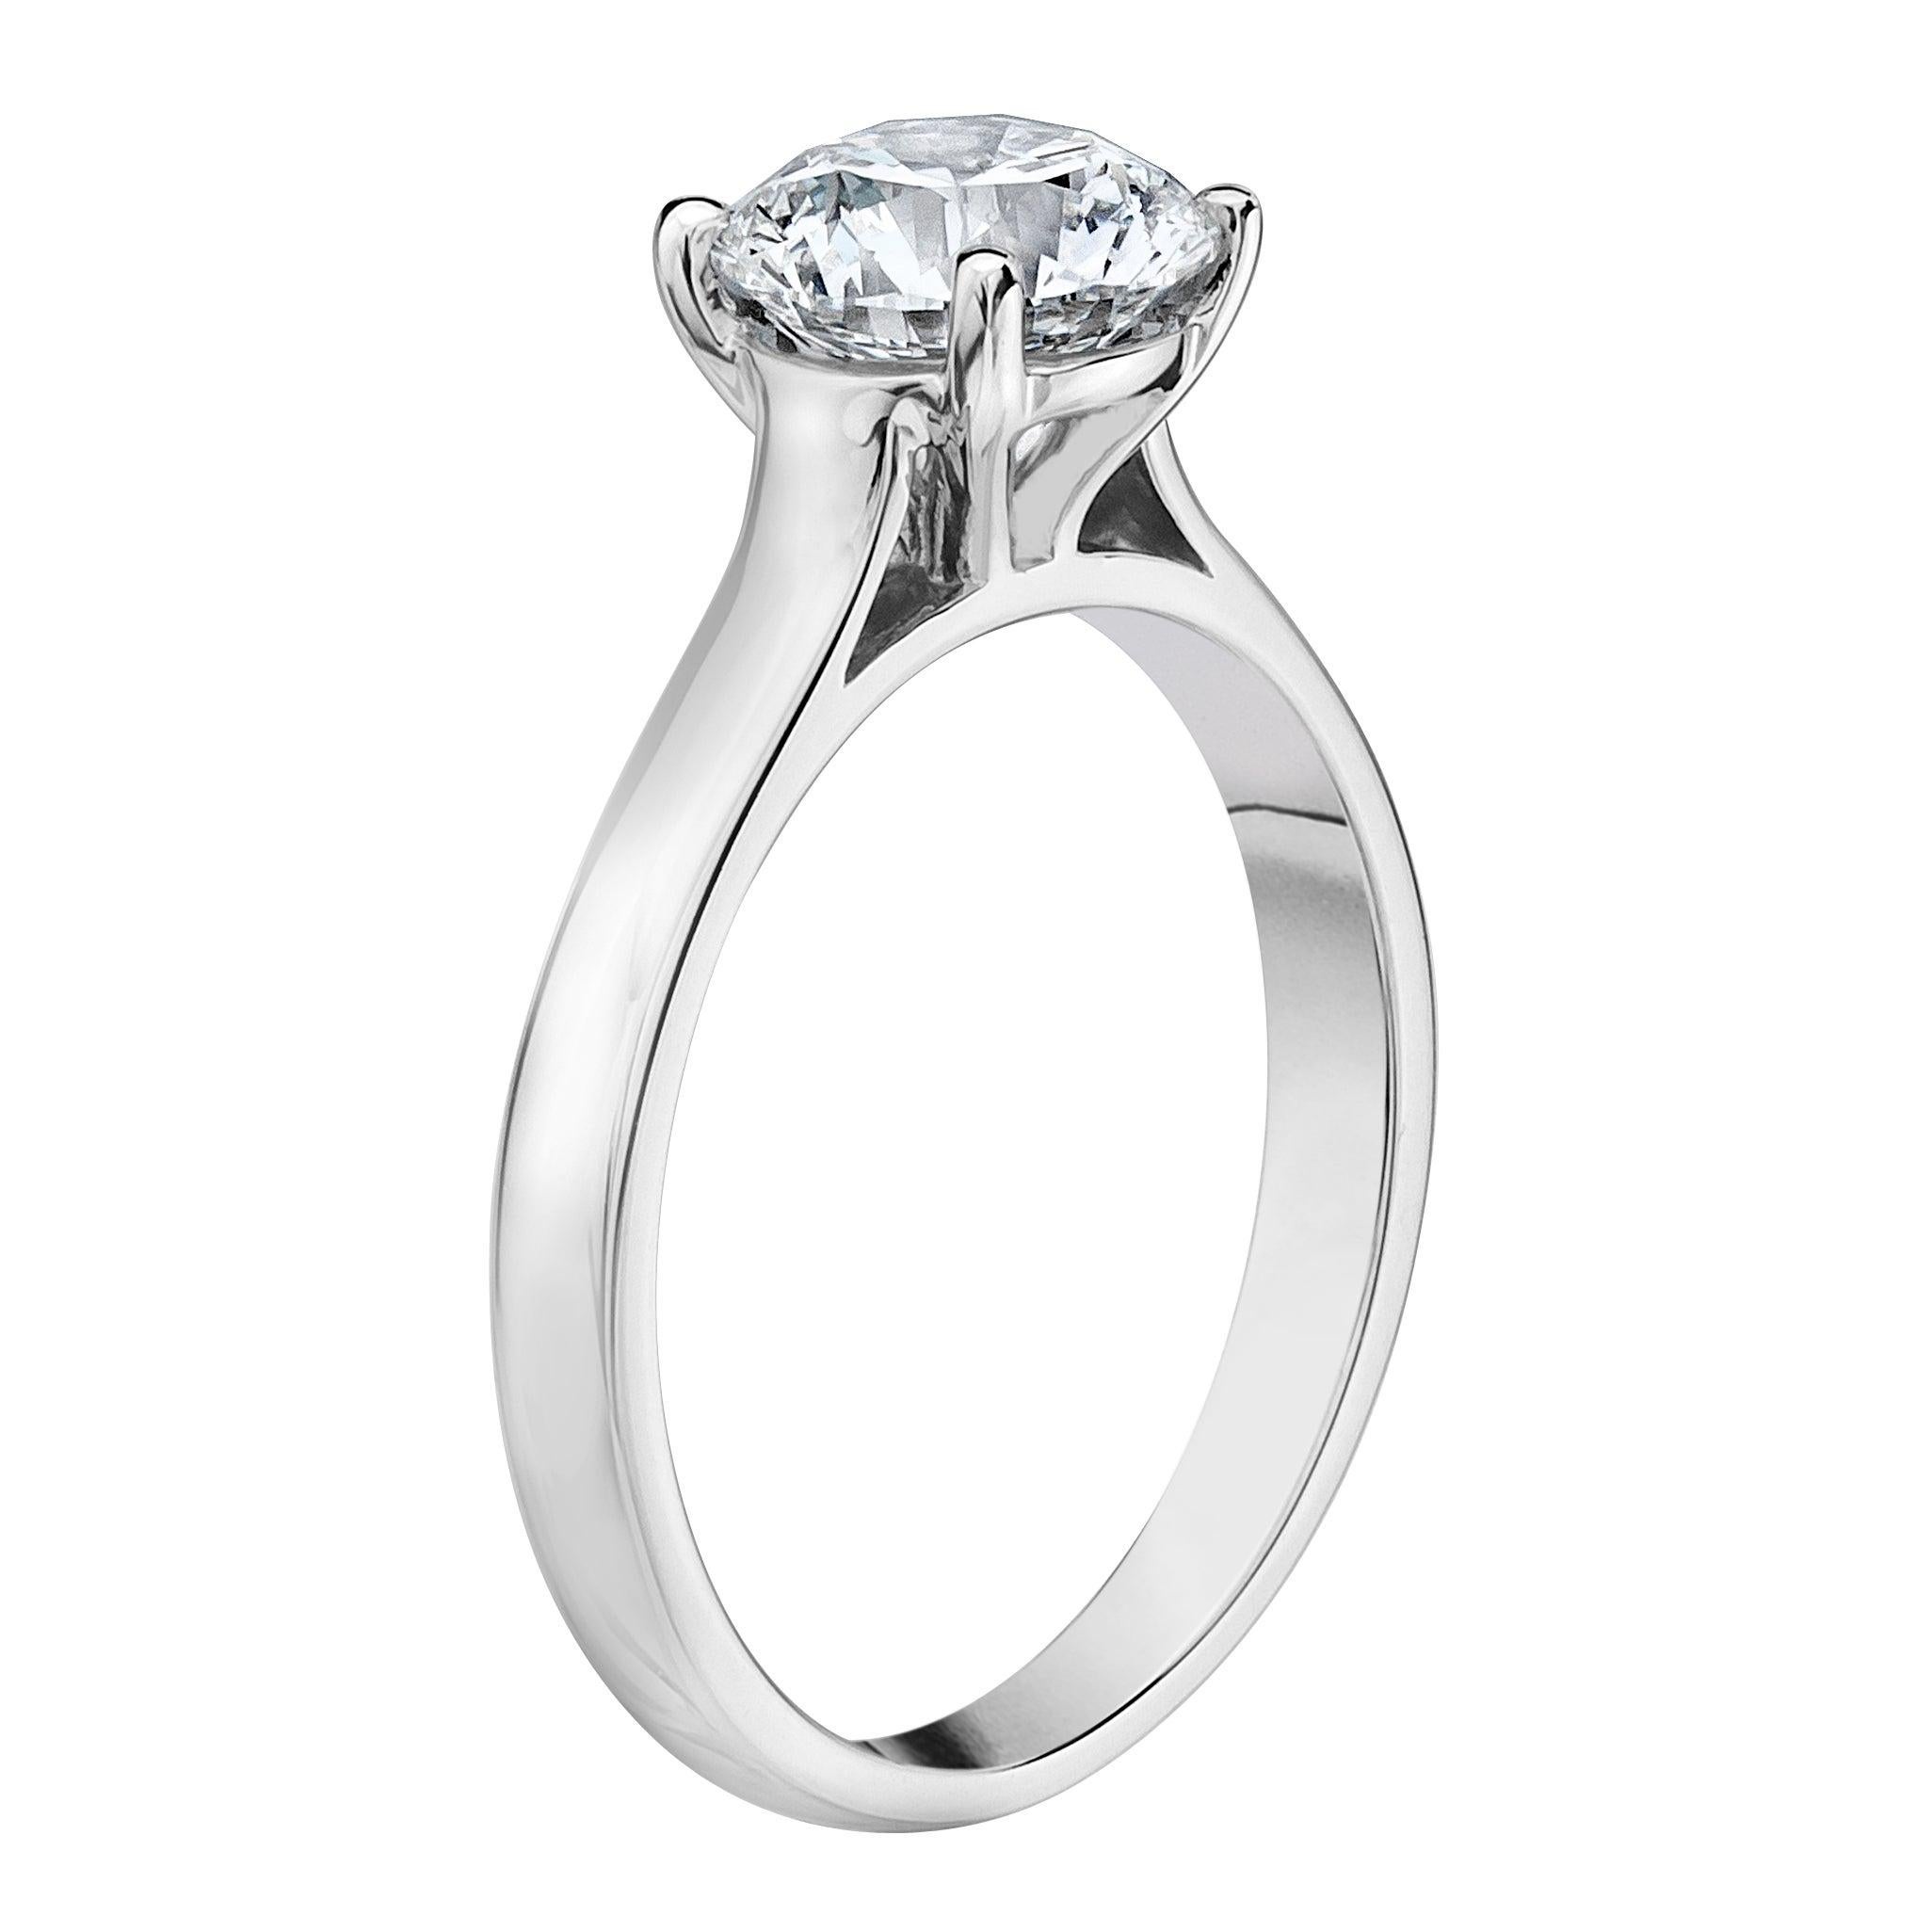 For Sale:  1.51 G Color SI1 Clarity Solitaire Platinum Diamond Ring GIA Certified EX EX EX 4